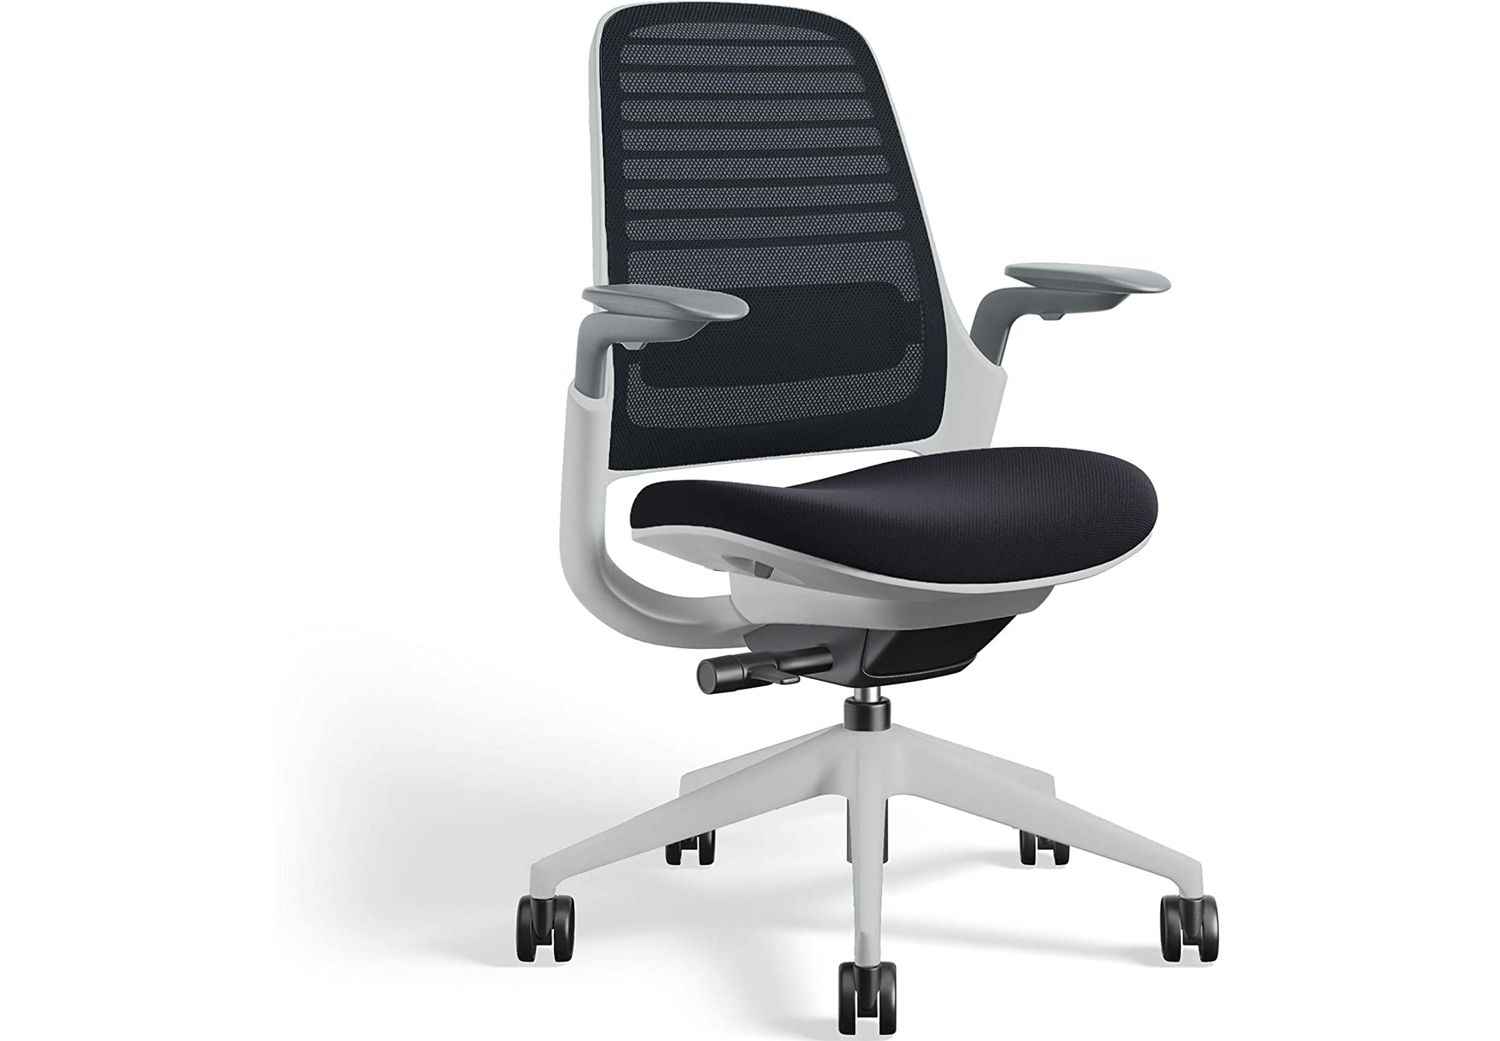 The NetDigz Editors rate the Steelcase Series 1 as the Optional Best Desk Chair.